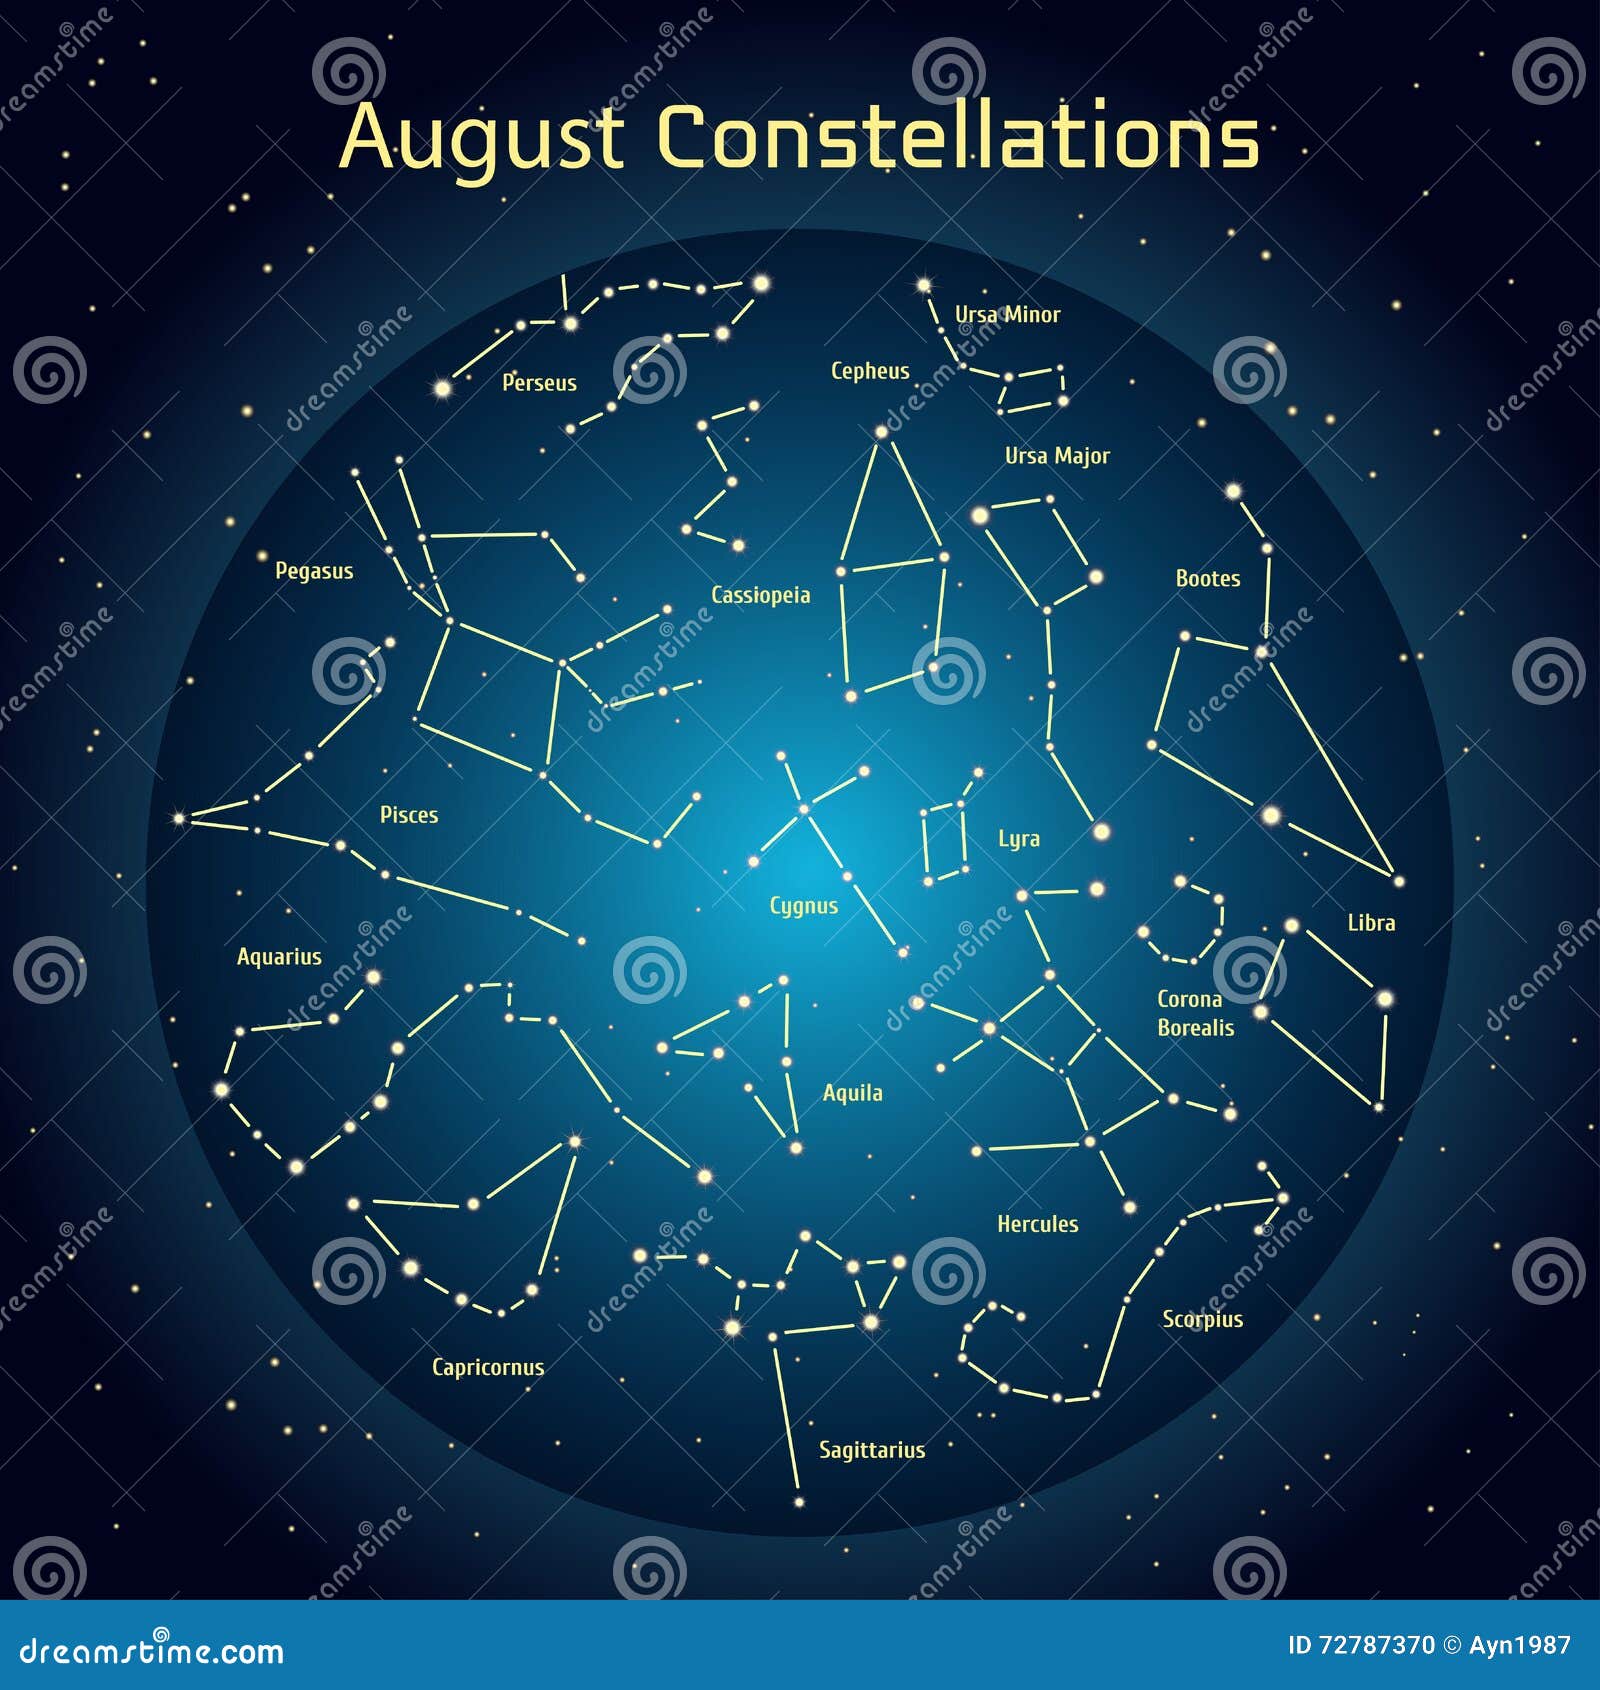 Vector Illustration of the Constellations the Night Sky in August